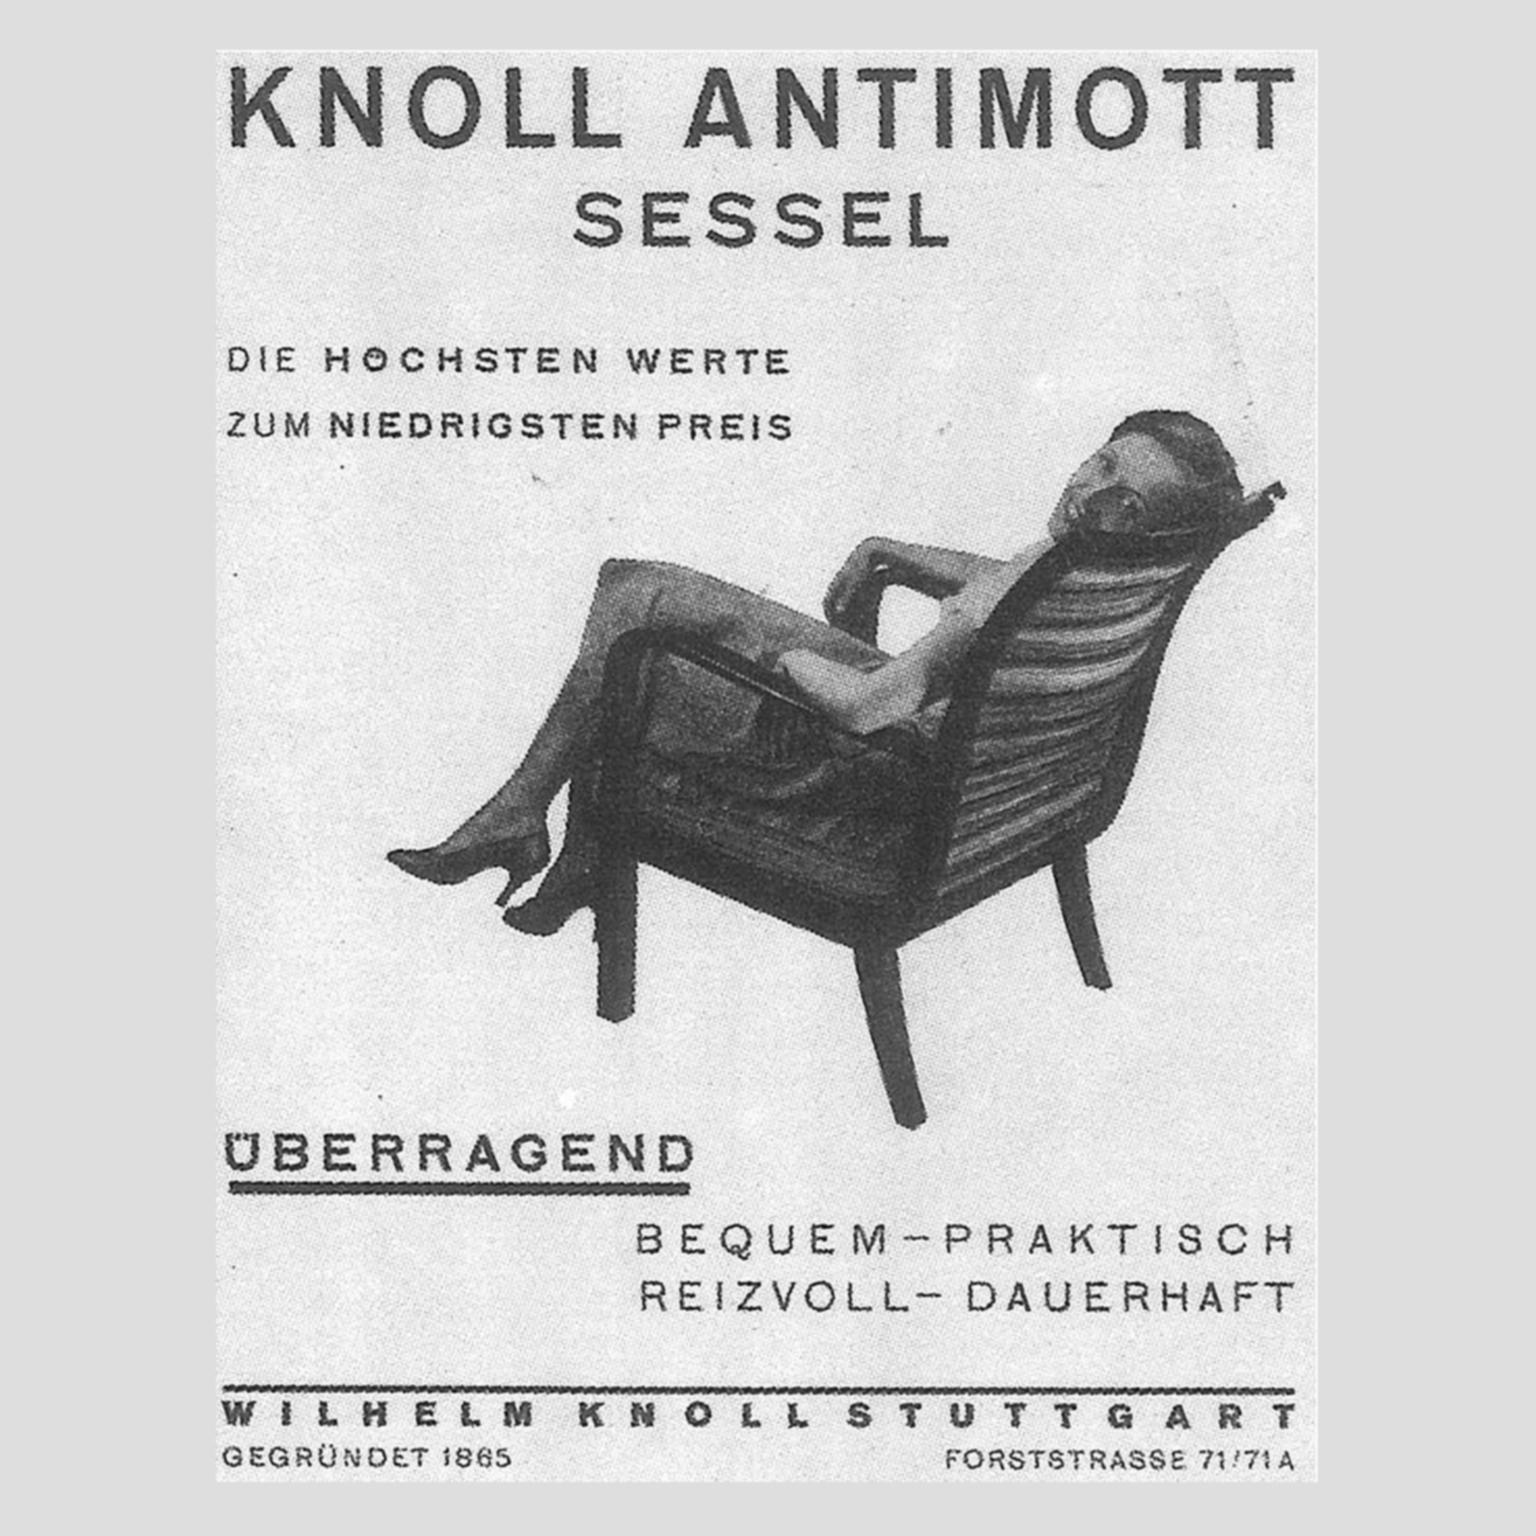 Modernist 1920s Lounge Chair Designed by Wilhelm Knoll for Knoll Antimott 4